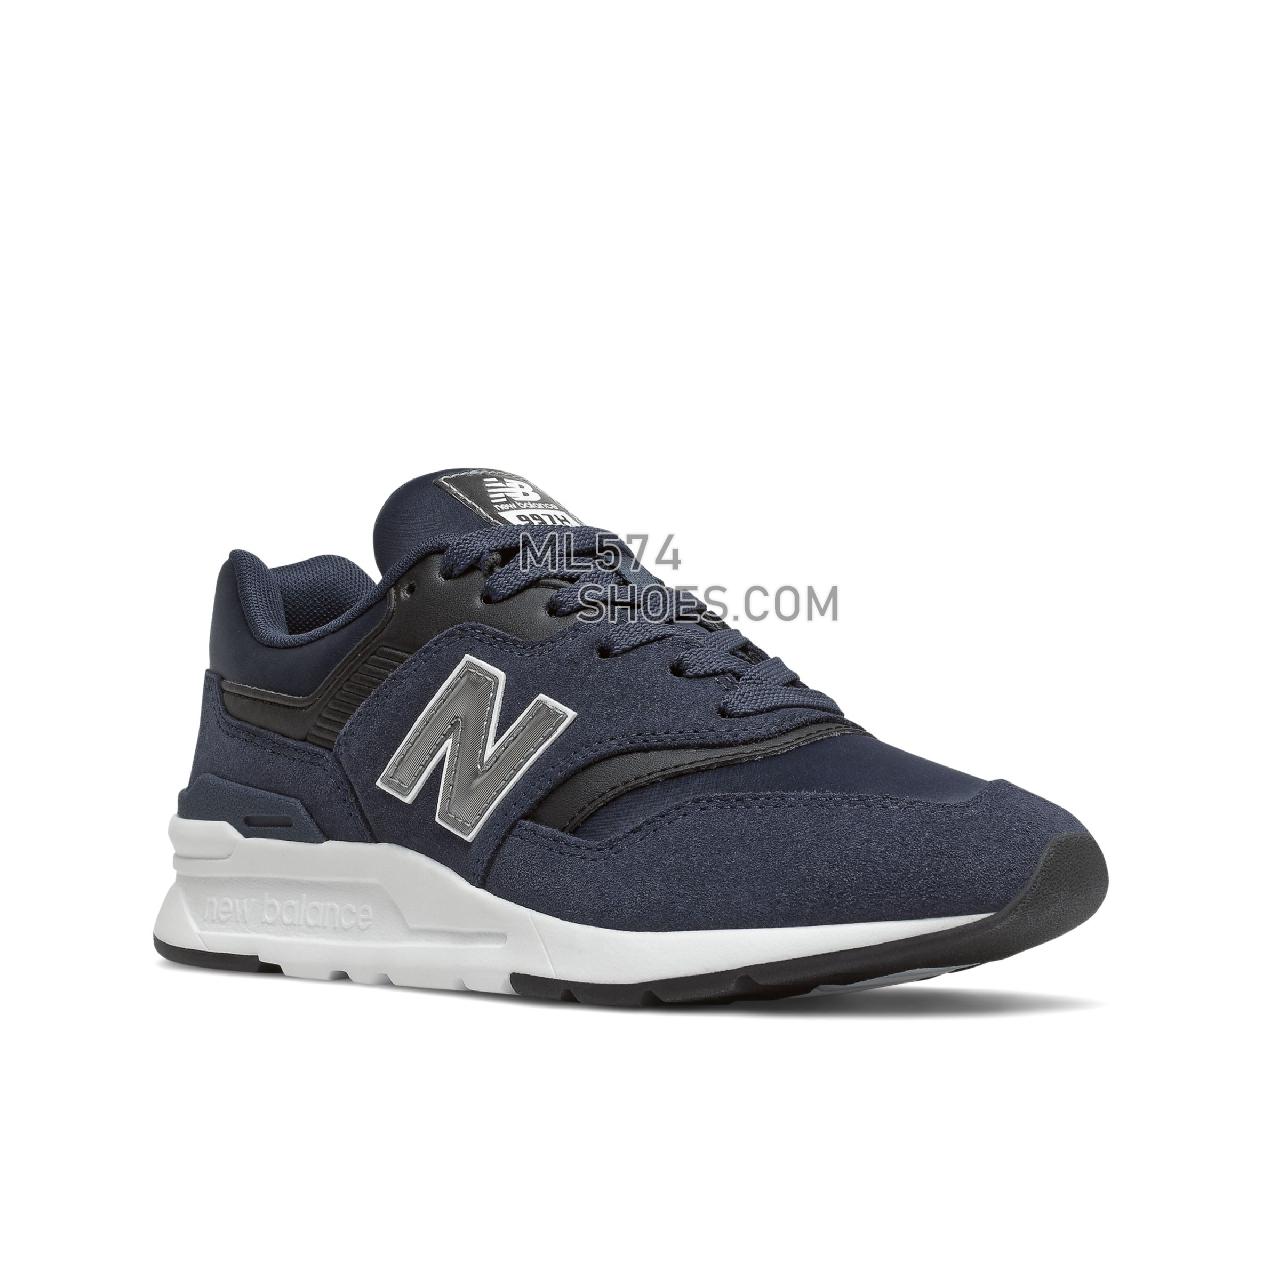 New Balance 997H - Women's Classic Sneakers - Natural Indigo with Black - CW997HGG